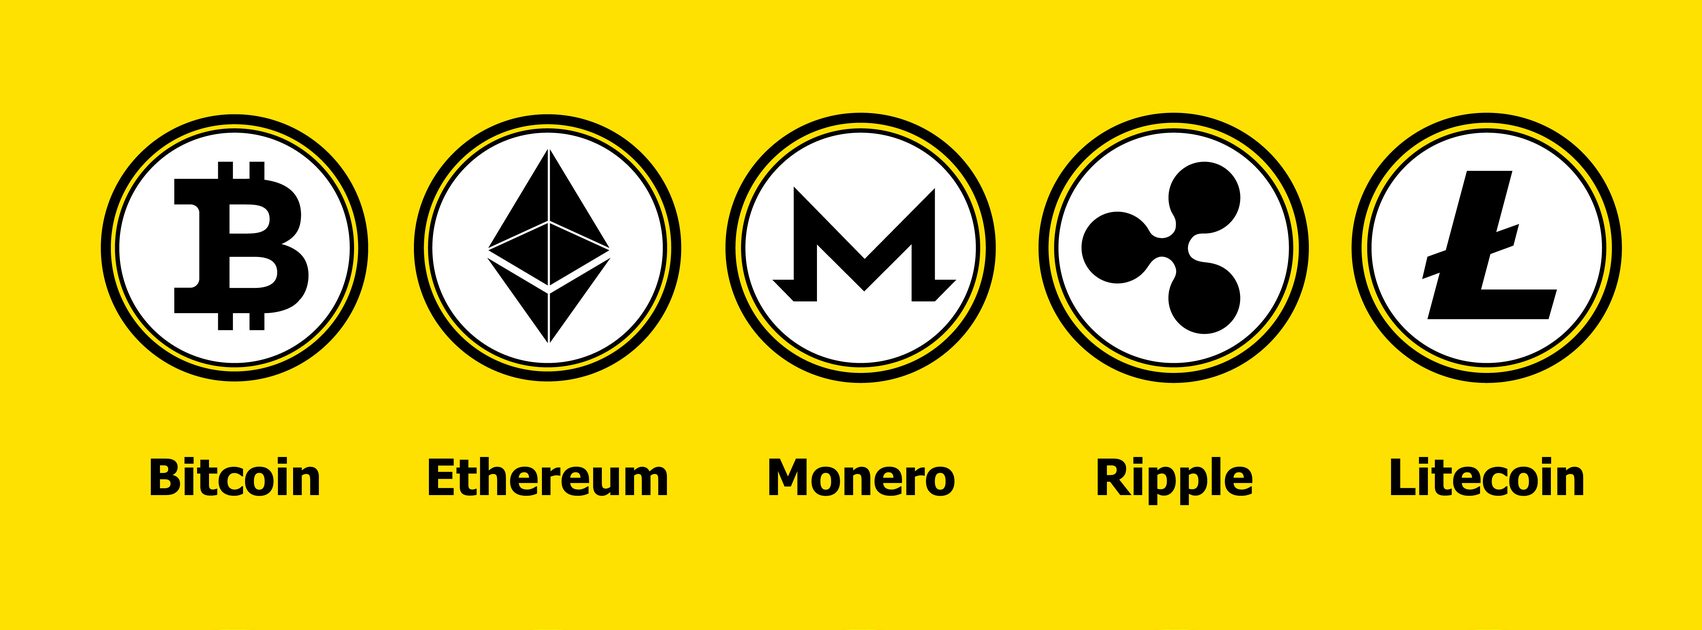 kinds of cryptocurrency